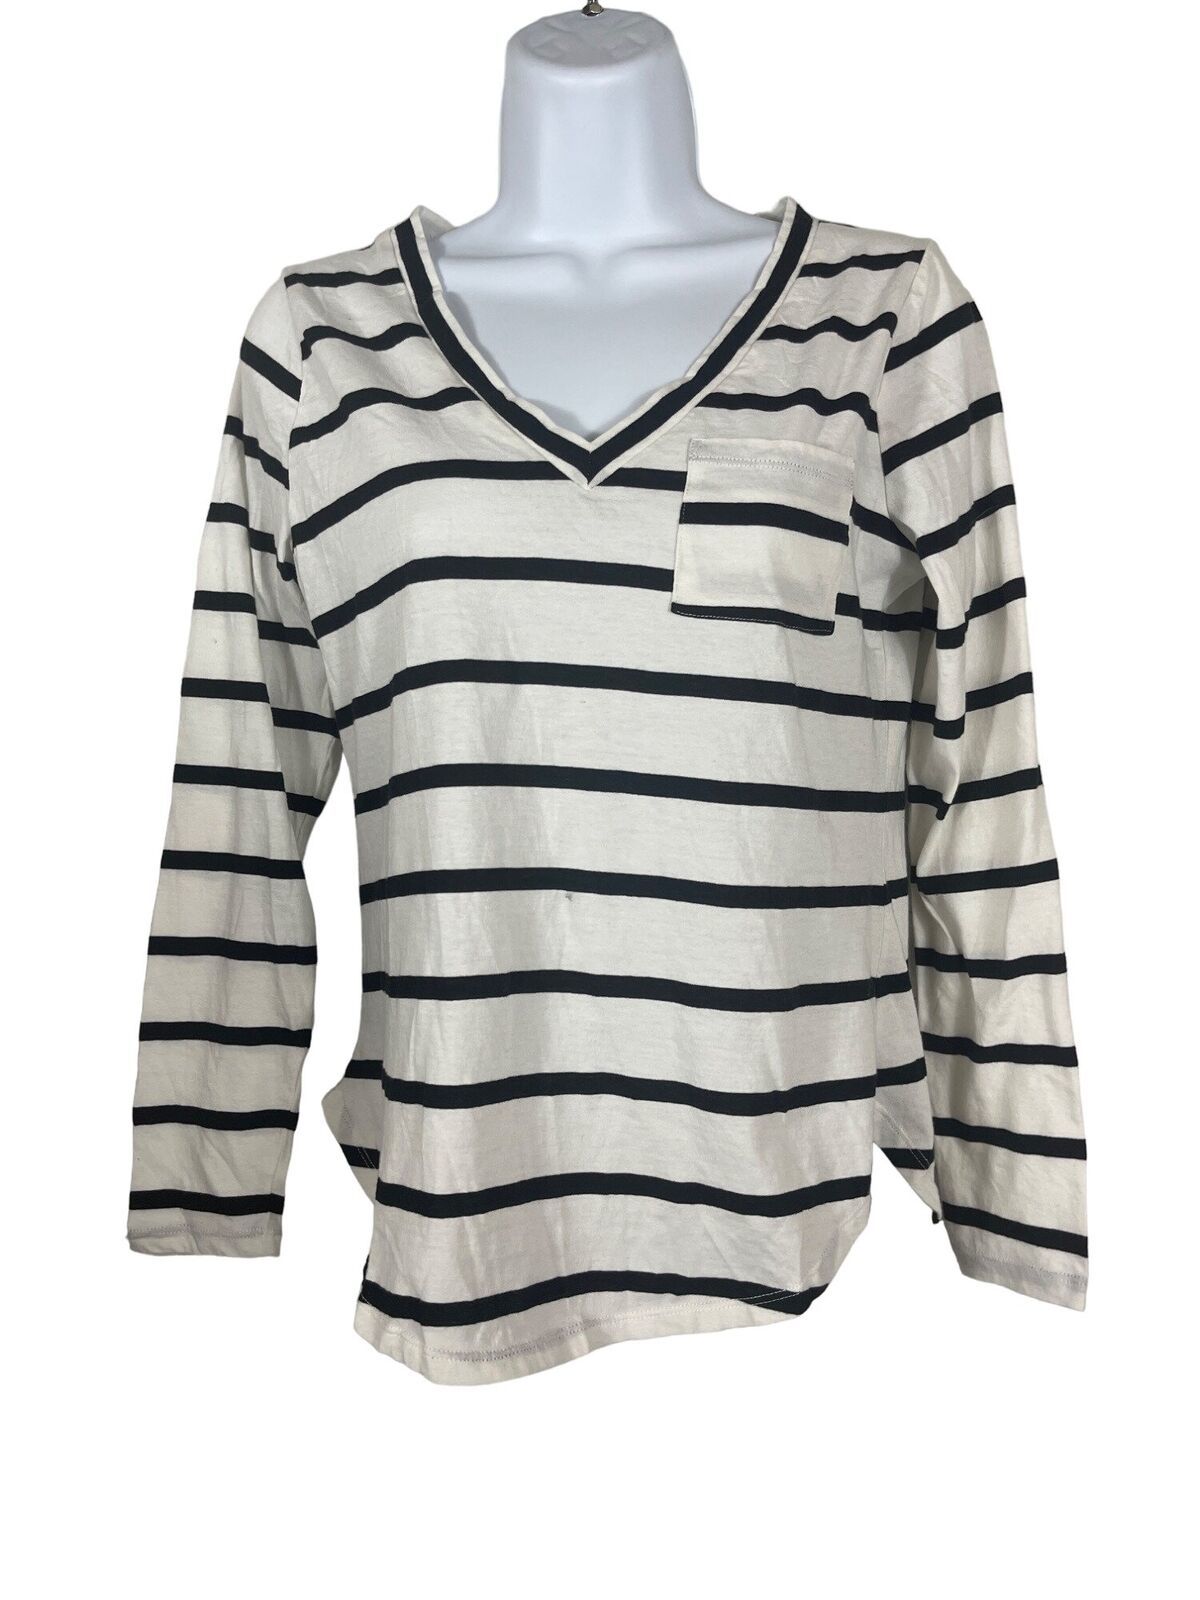 Primary image for Chaser Womens Long Sleeve VNeck Pocket T Shirt Juniors Small Striped Tee FLAW